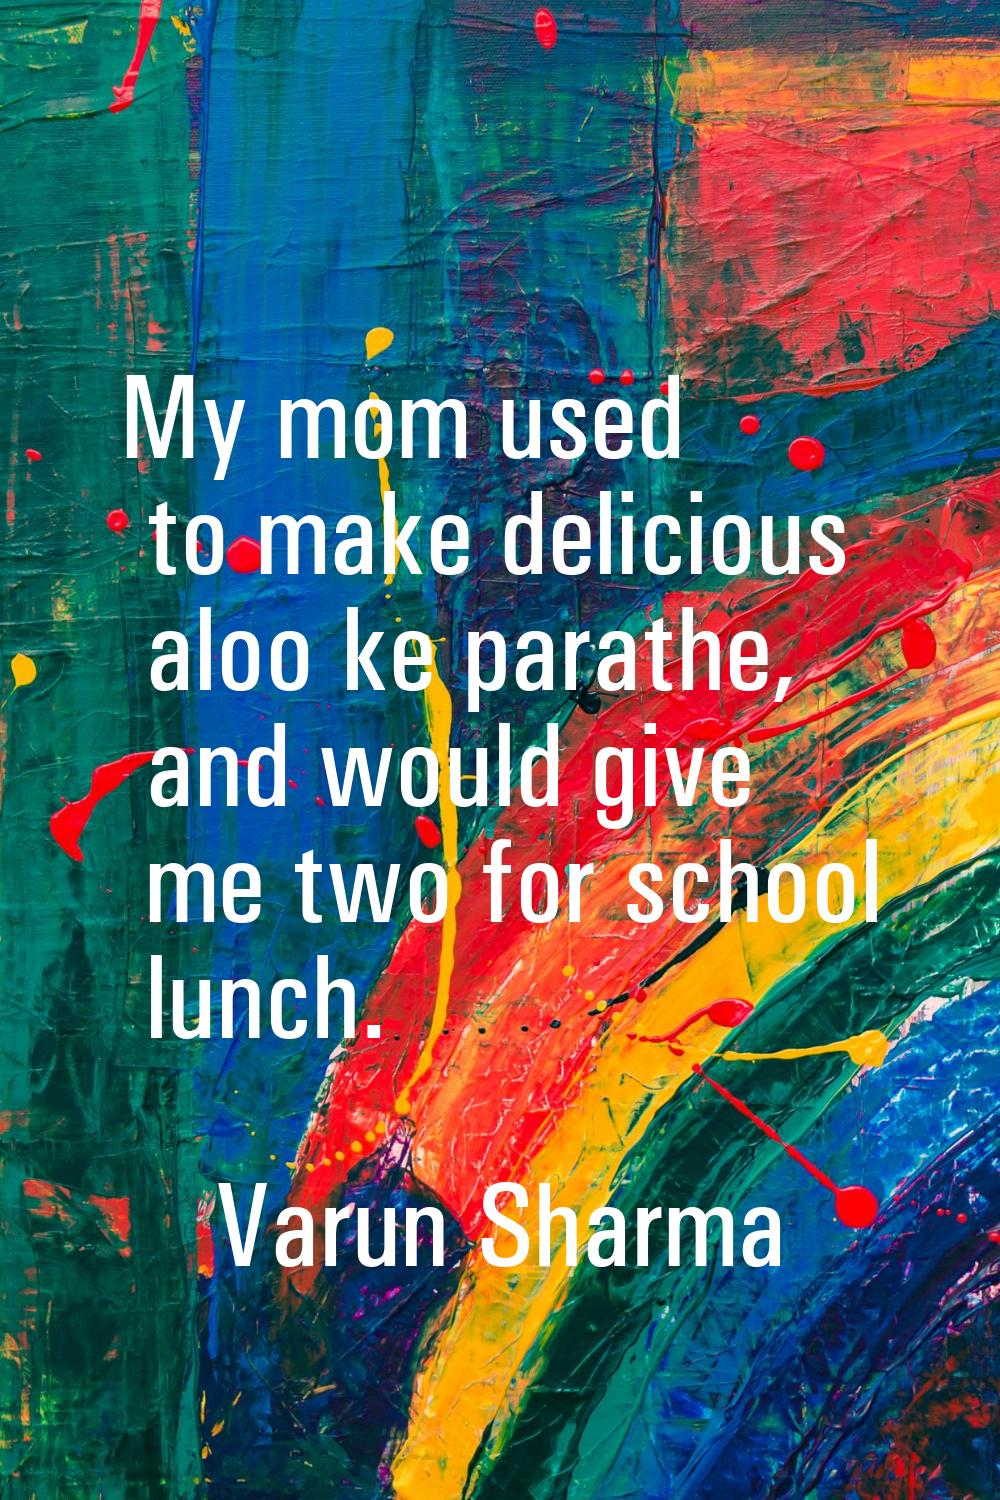 My mom used to make delicious aloo ke parathe, and would give me two for school lunch.